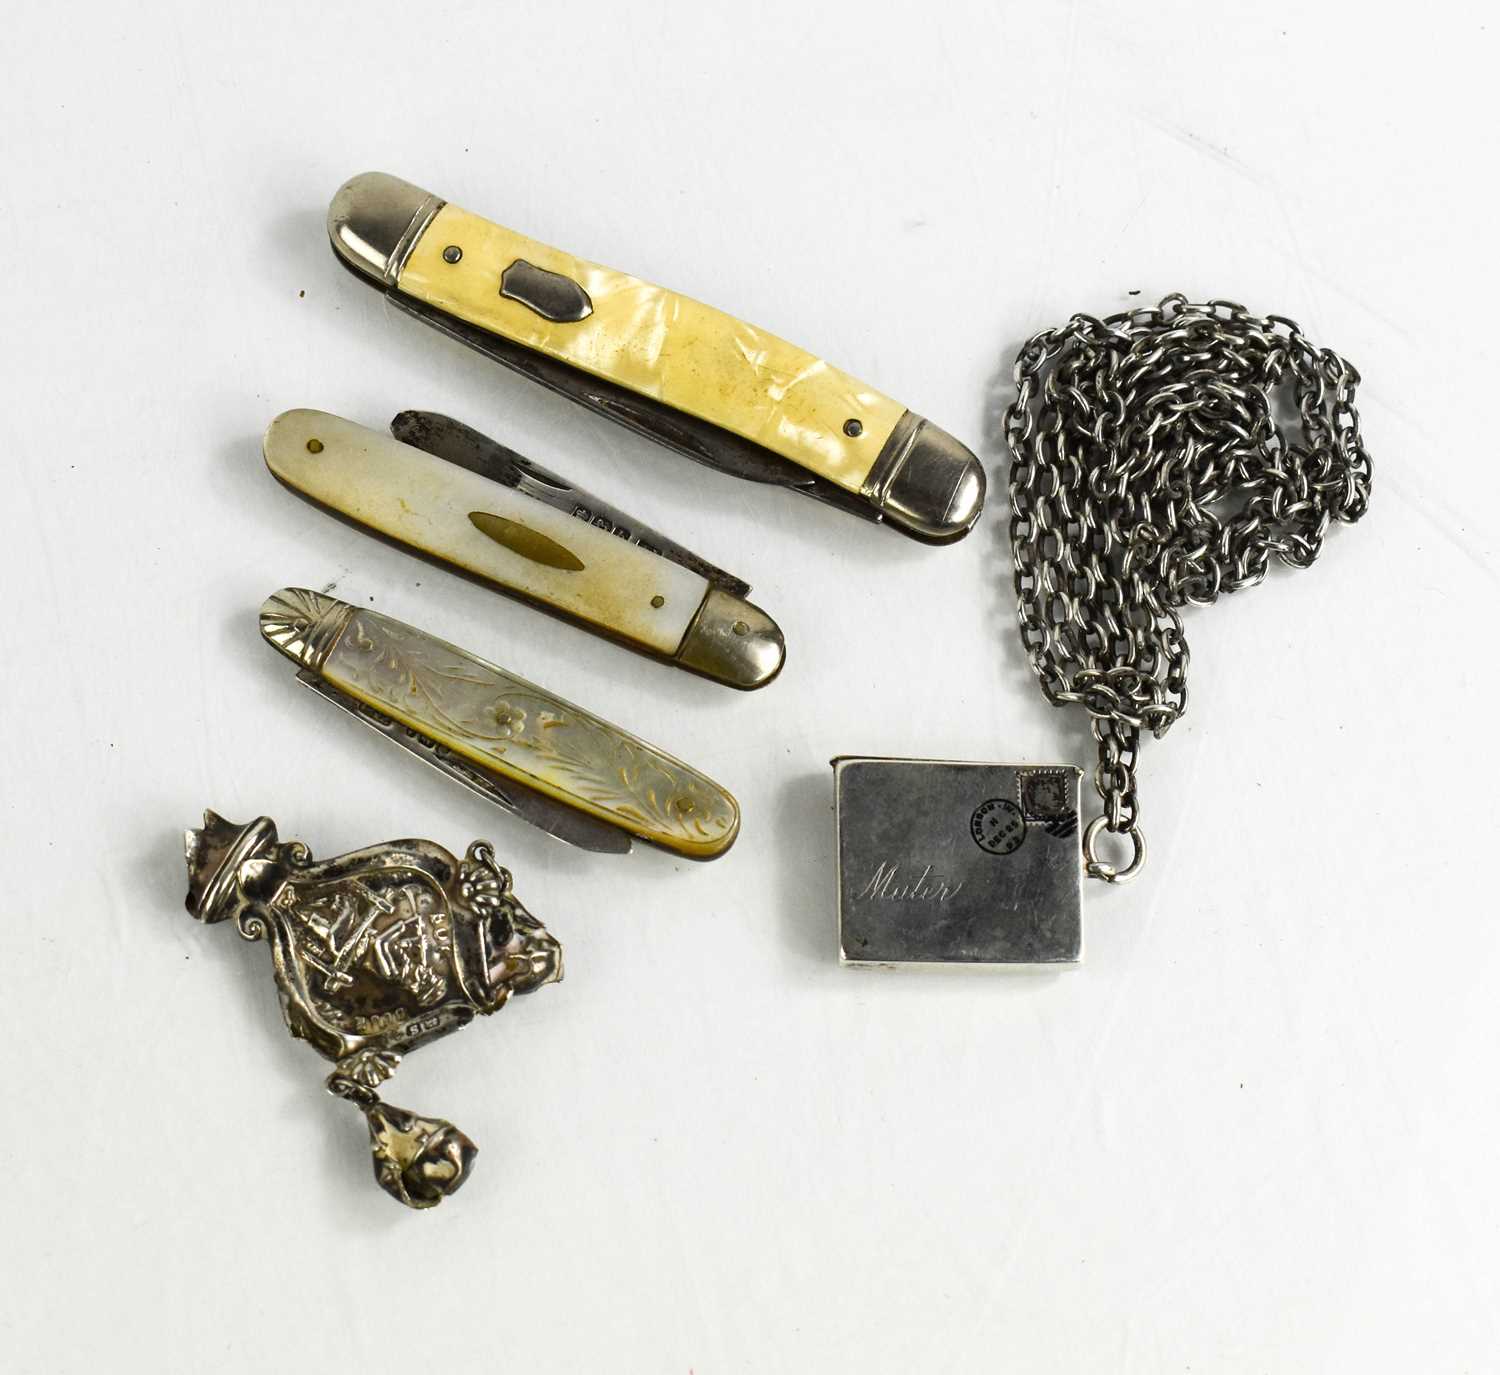 Two 19th century silver and mother of pearl fruit knives, a steel penknife, a silver section of a